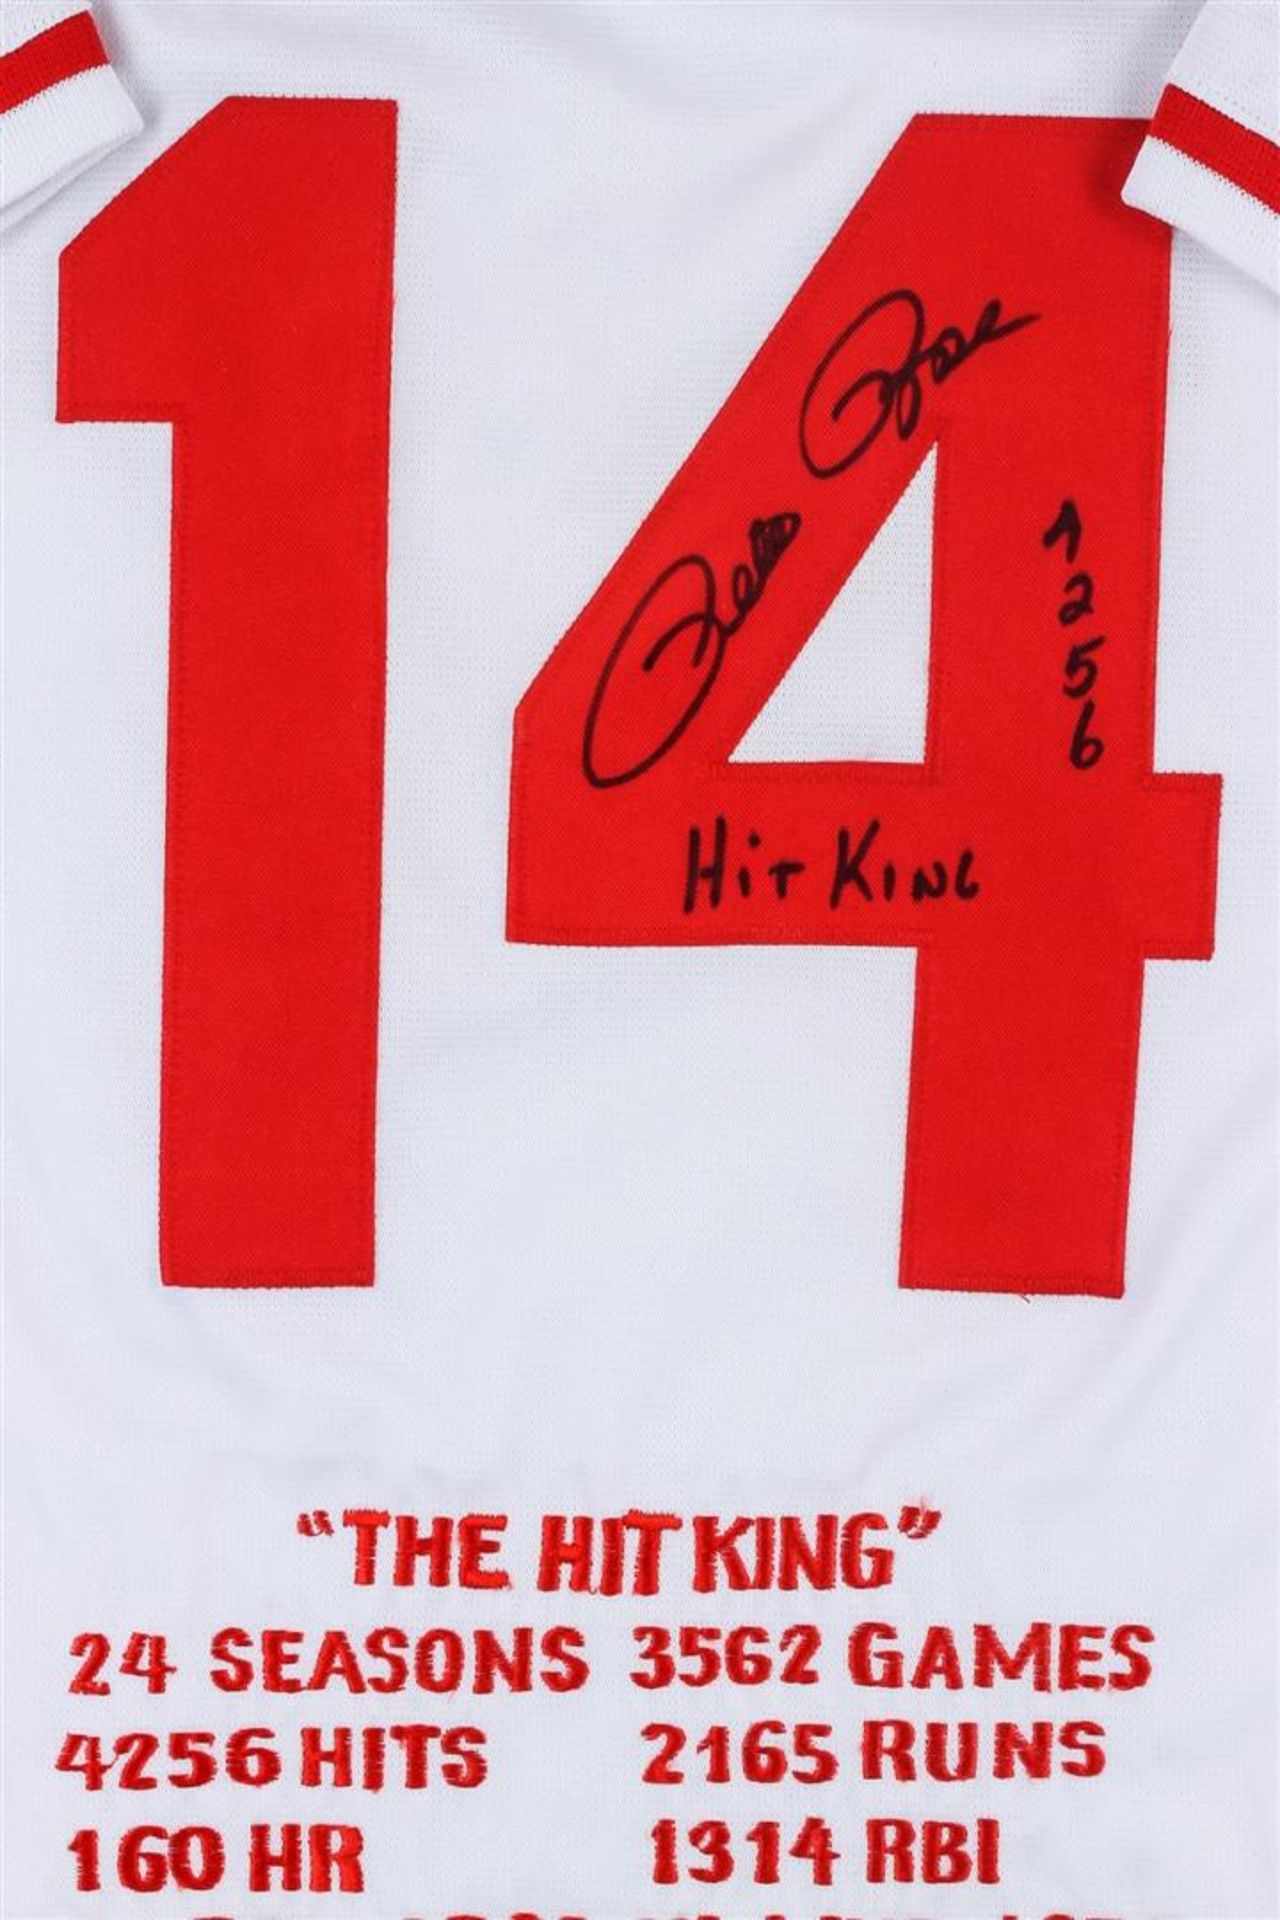 Cincinnati Reds Pete Rose Autographed Jersey With Stats - Image 2 of 3